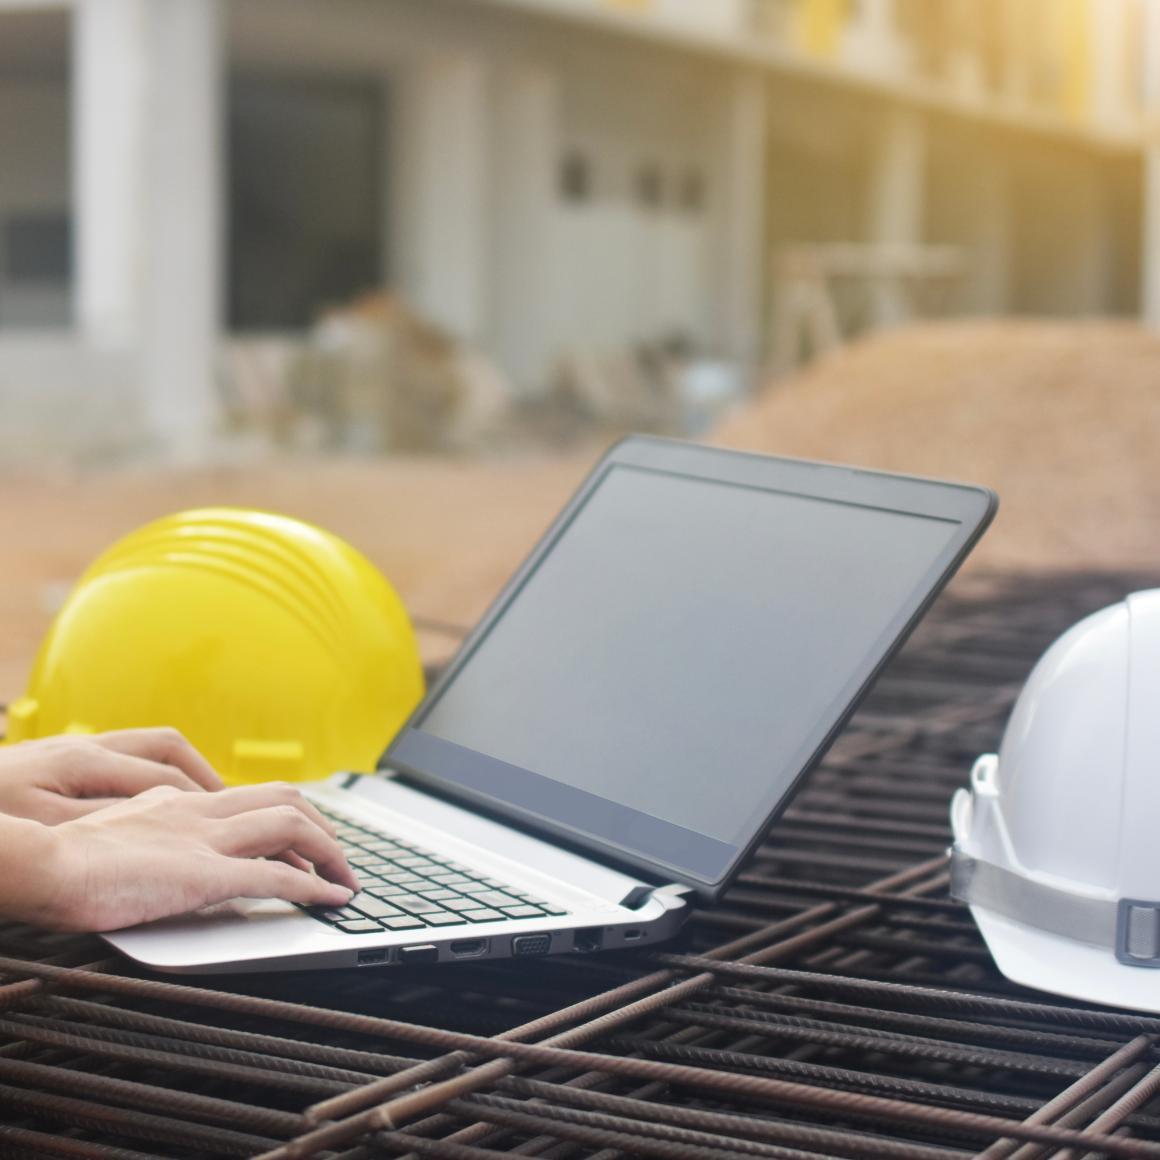 Hands typing on a laptop computer, with hard hats and construction site in the background image link to story